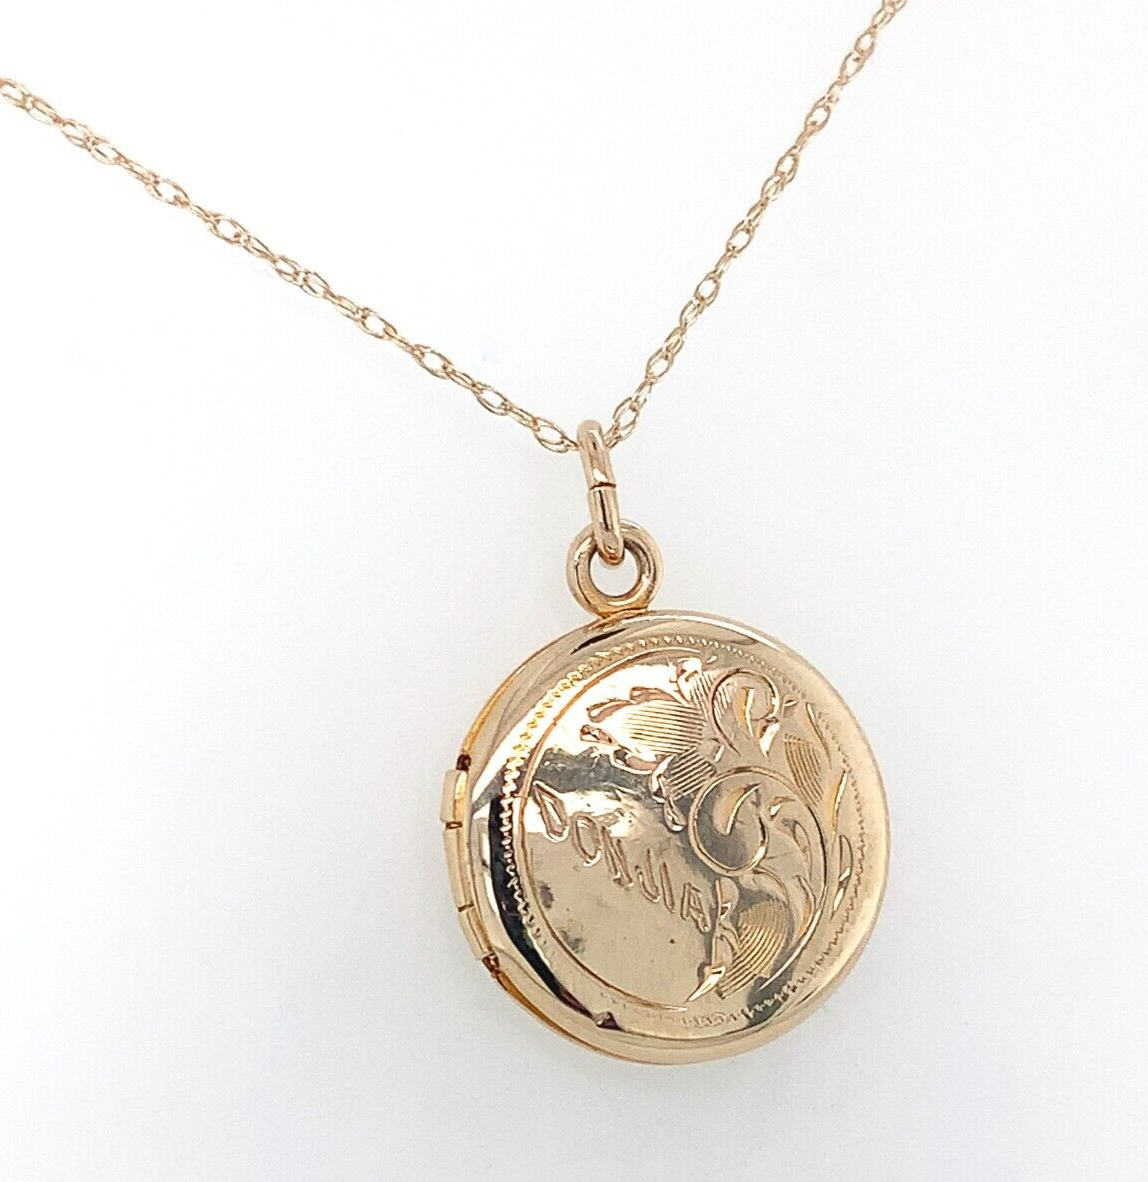 Primary image for 10k Yellow Gold Small Round Engraved Locket with 14k Chain Jewelry (#J6525)